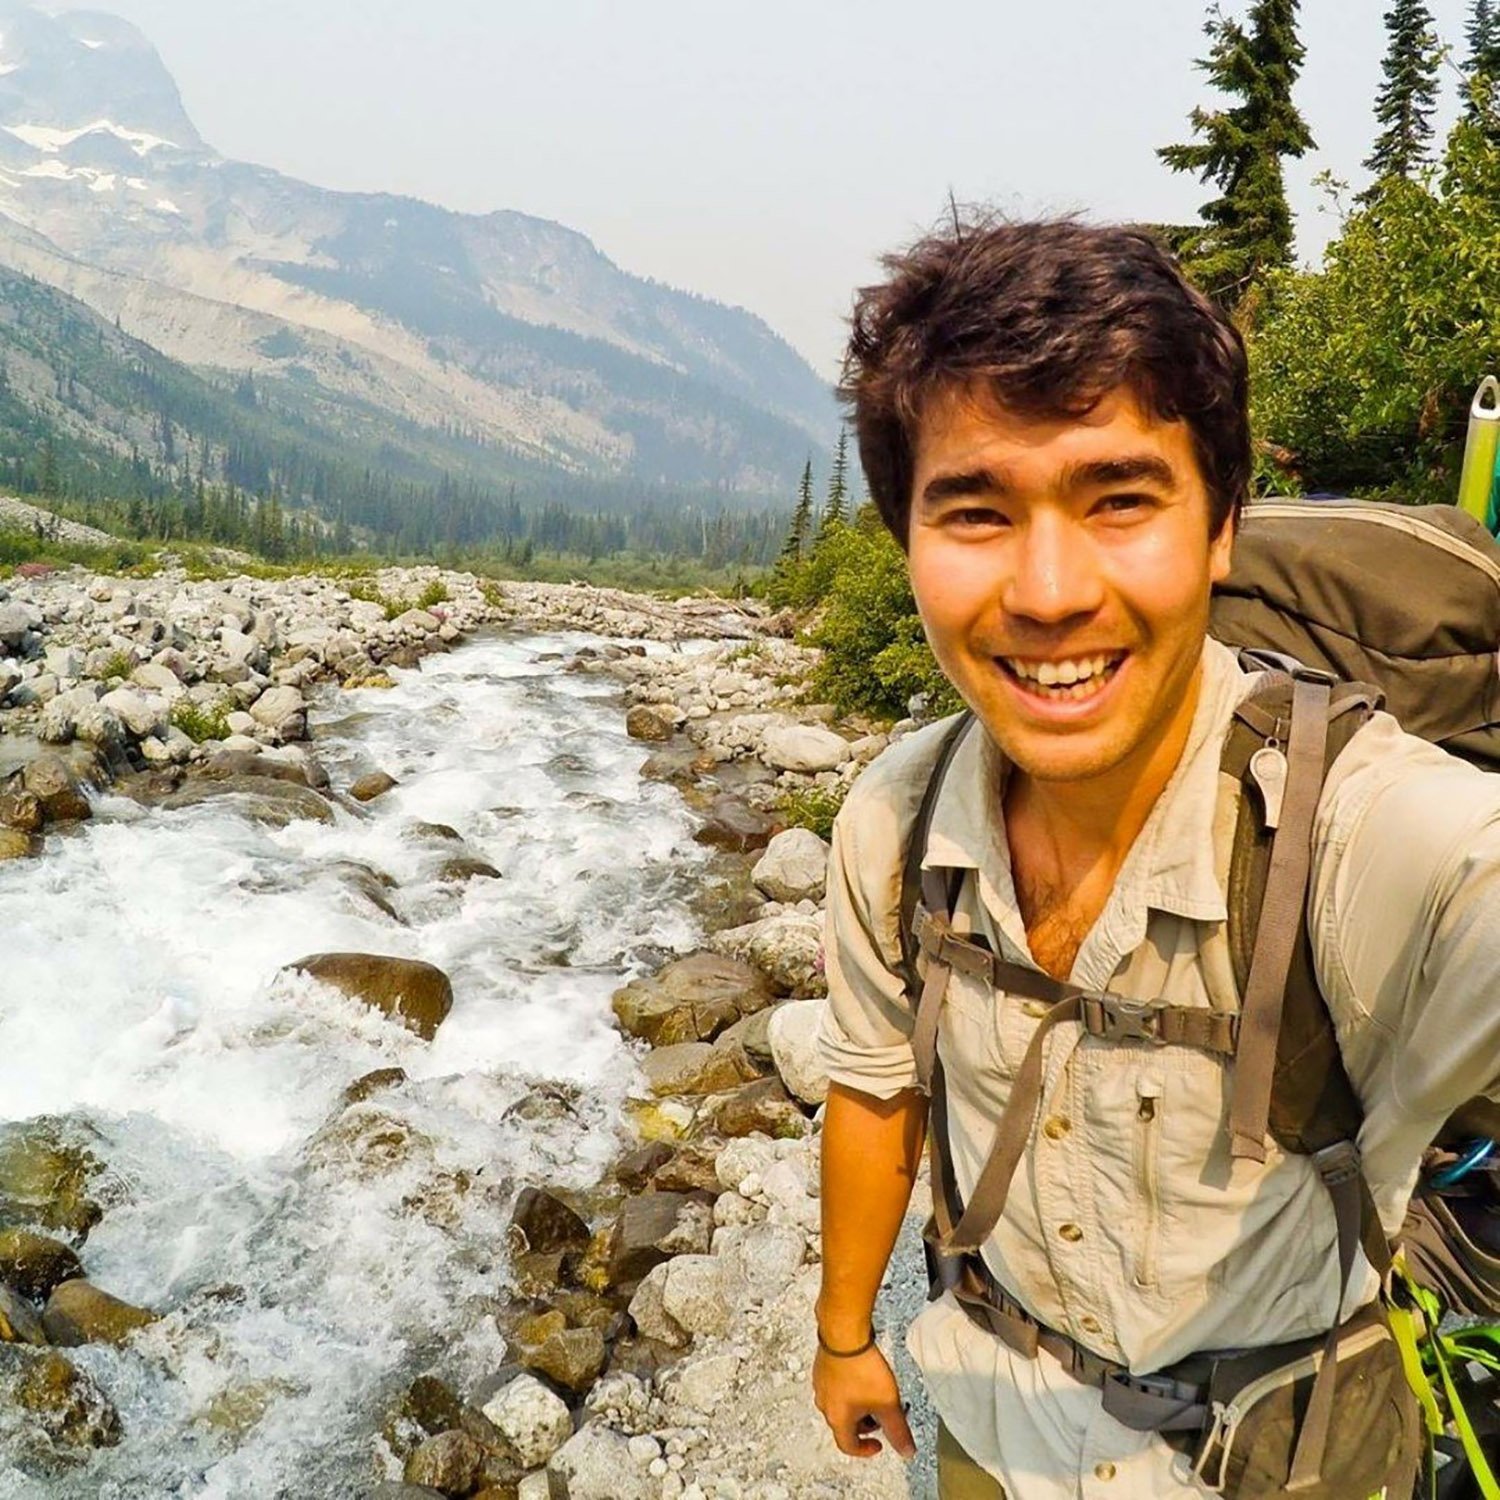 An American self-styled adventurer and Christian missionary, John Allen Chau, has been killed and buried by a tribe of hunter-gatherers on a remote island in the Indian Ocean where he had gone to proselytize, according to local law enforcement officials, in this undated image obtained from a social media on November 23, 2018. @JOHNACHAU/via REUTERS